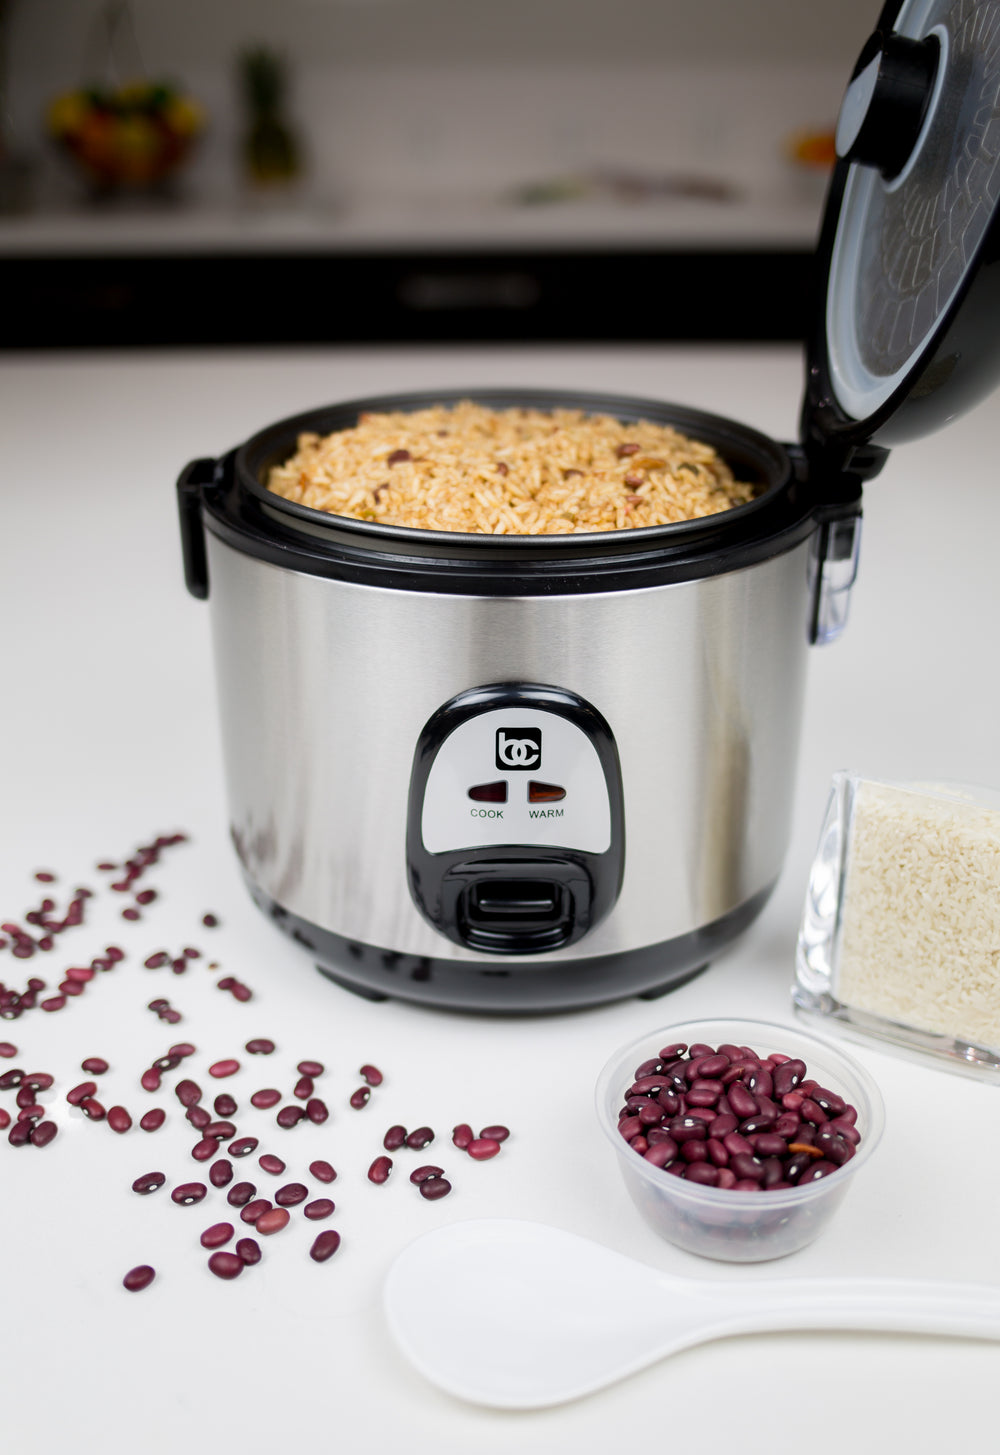  20 Cup Digital Rice Cooker Stainless Steel: Home & Kitchen